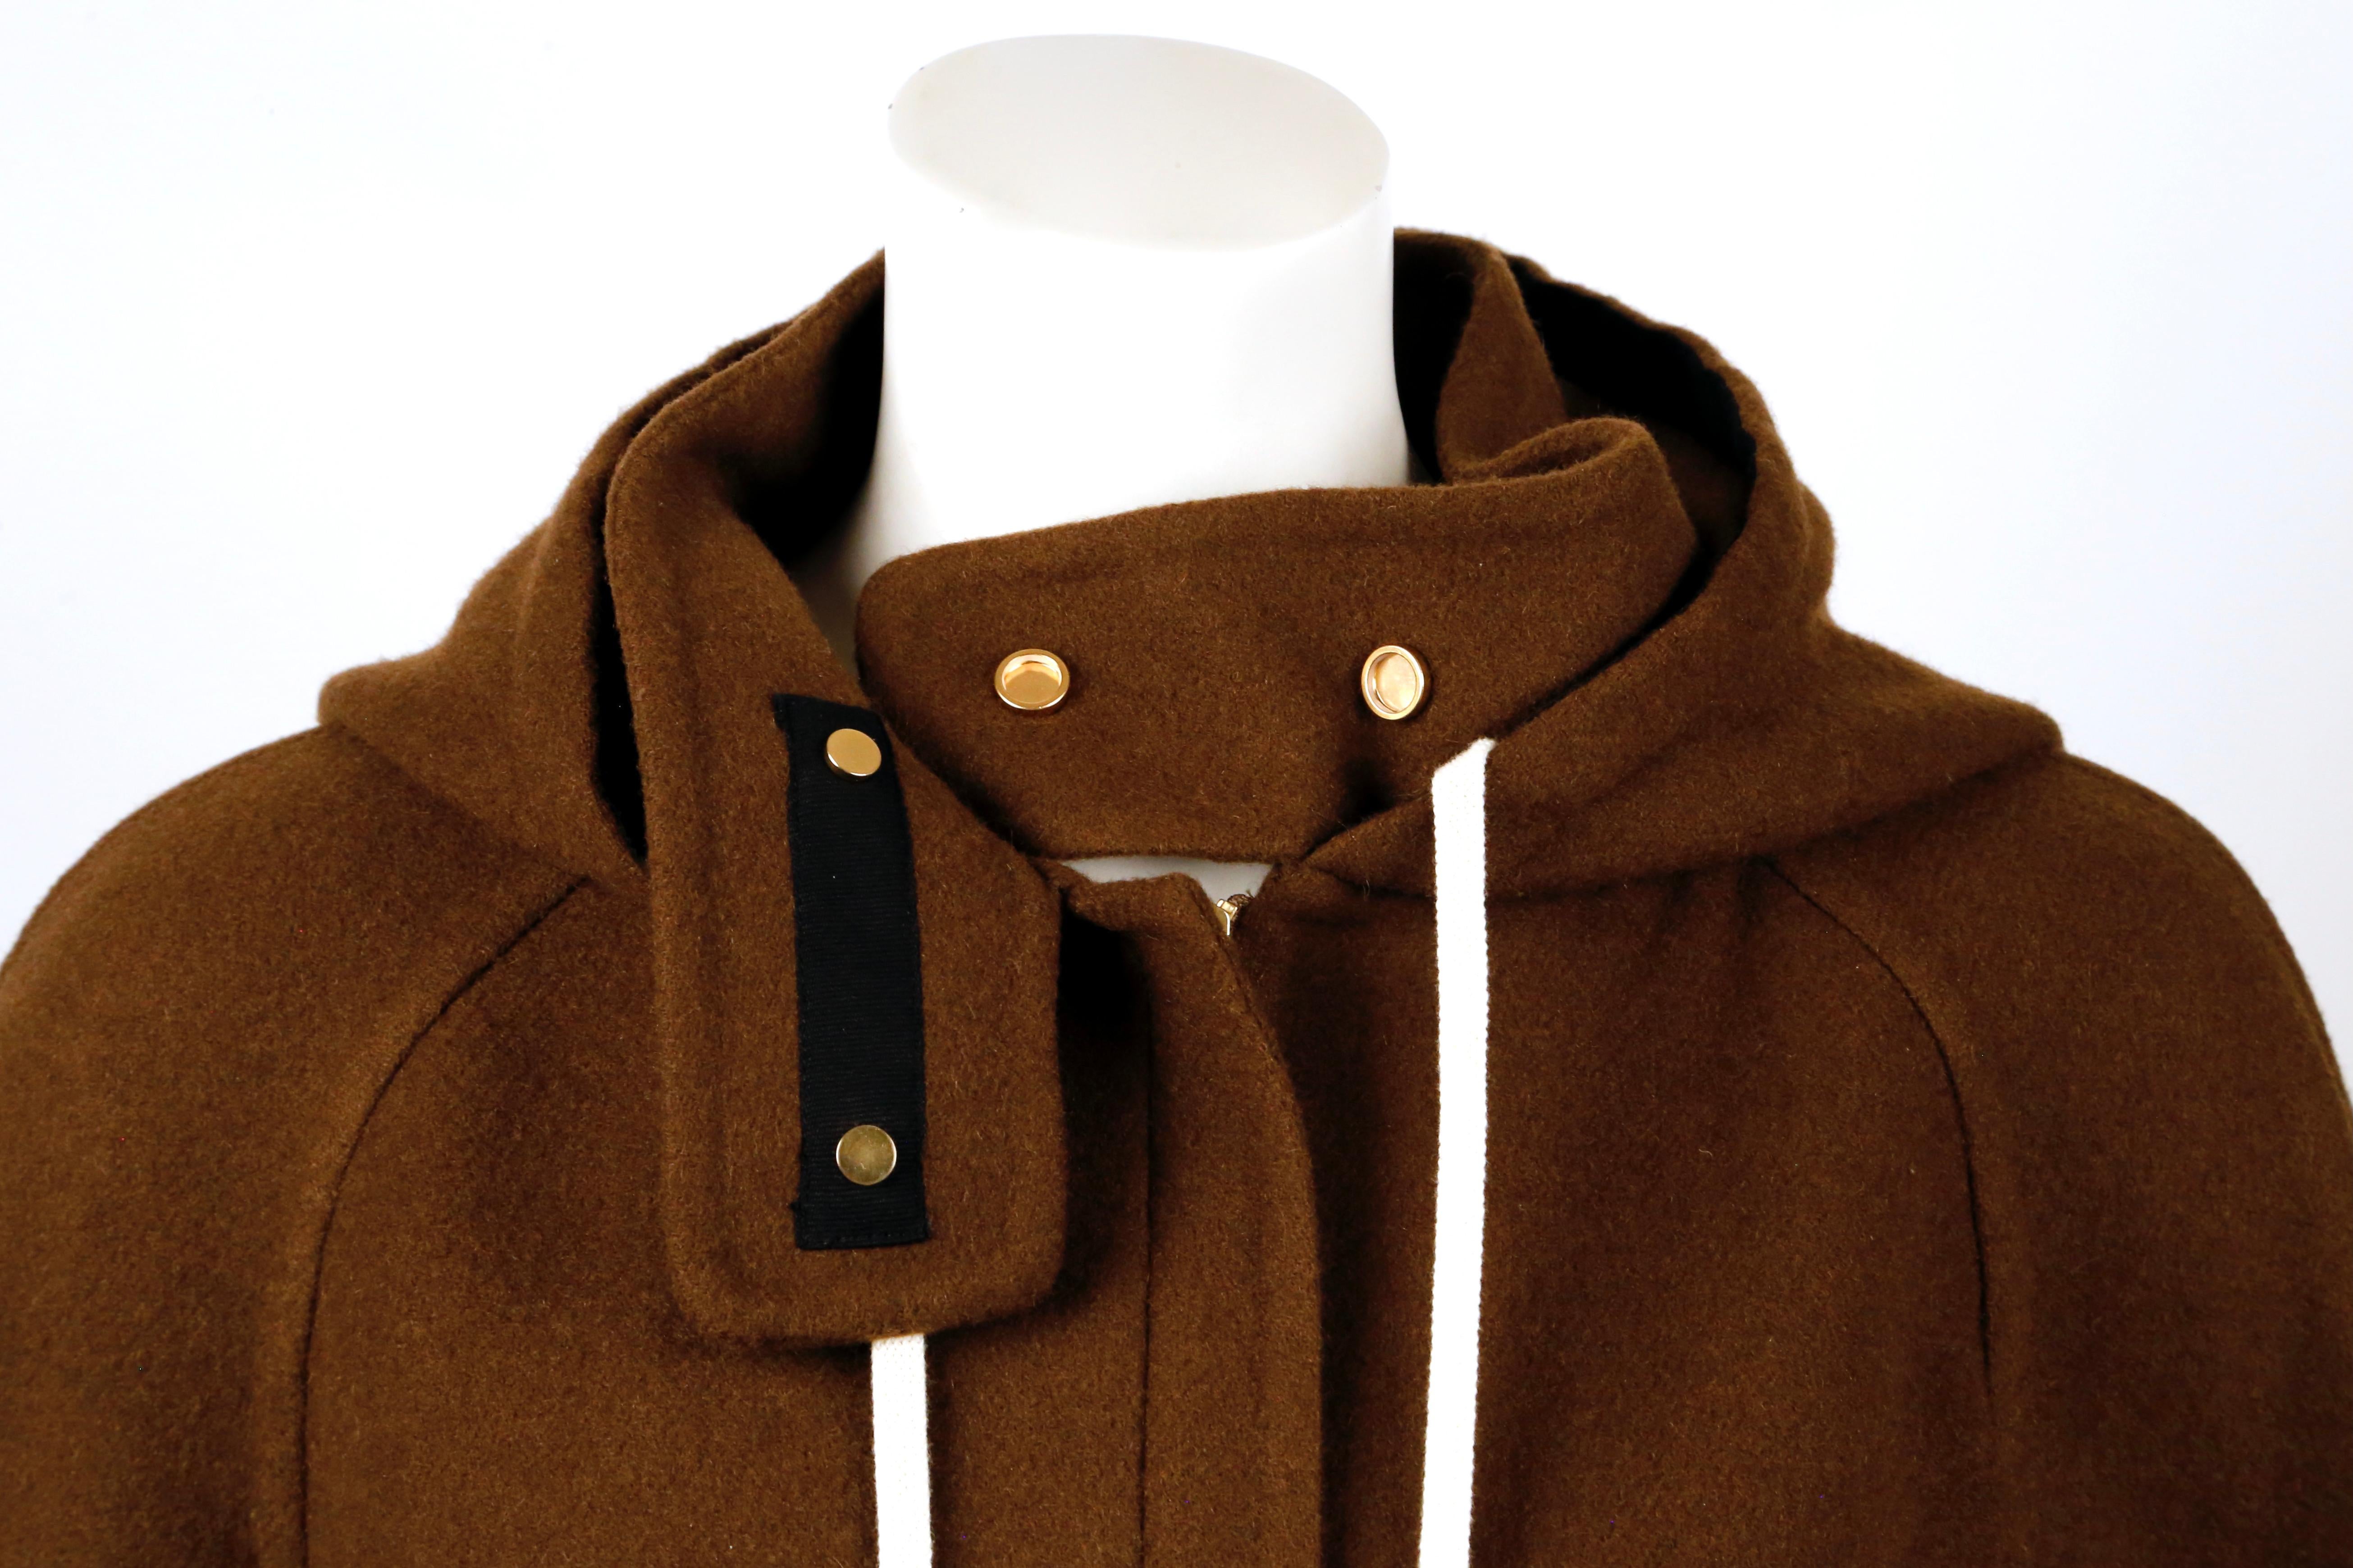 Women's 2014 CELINE by PHOEBE PHILO hooded cashmere jacket with patch pockets